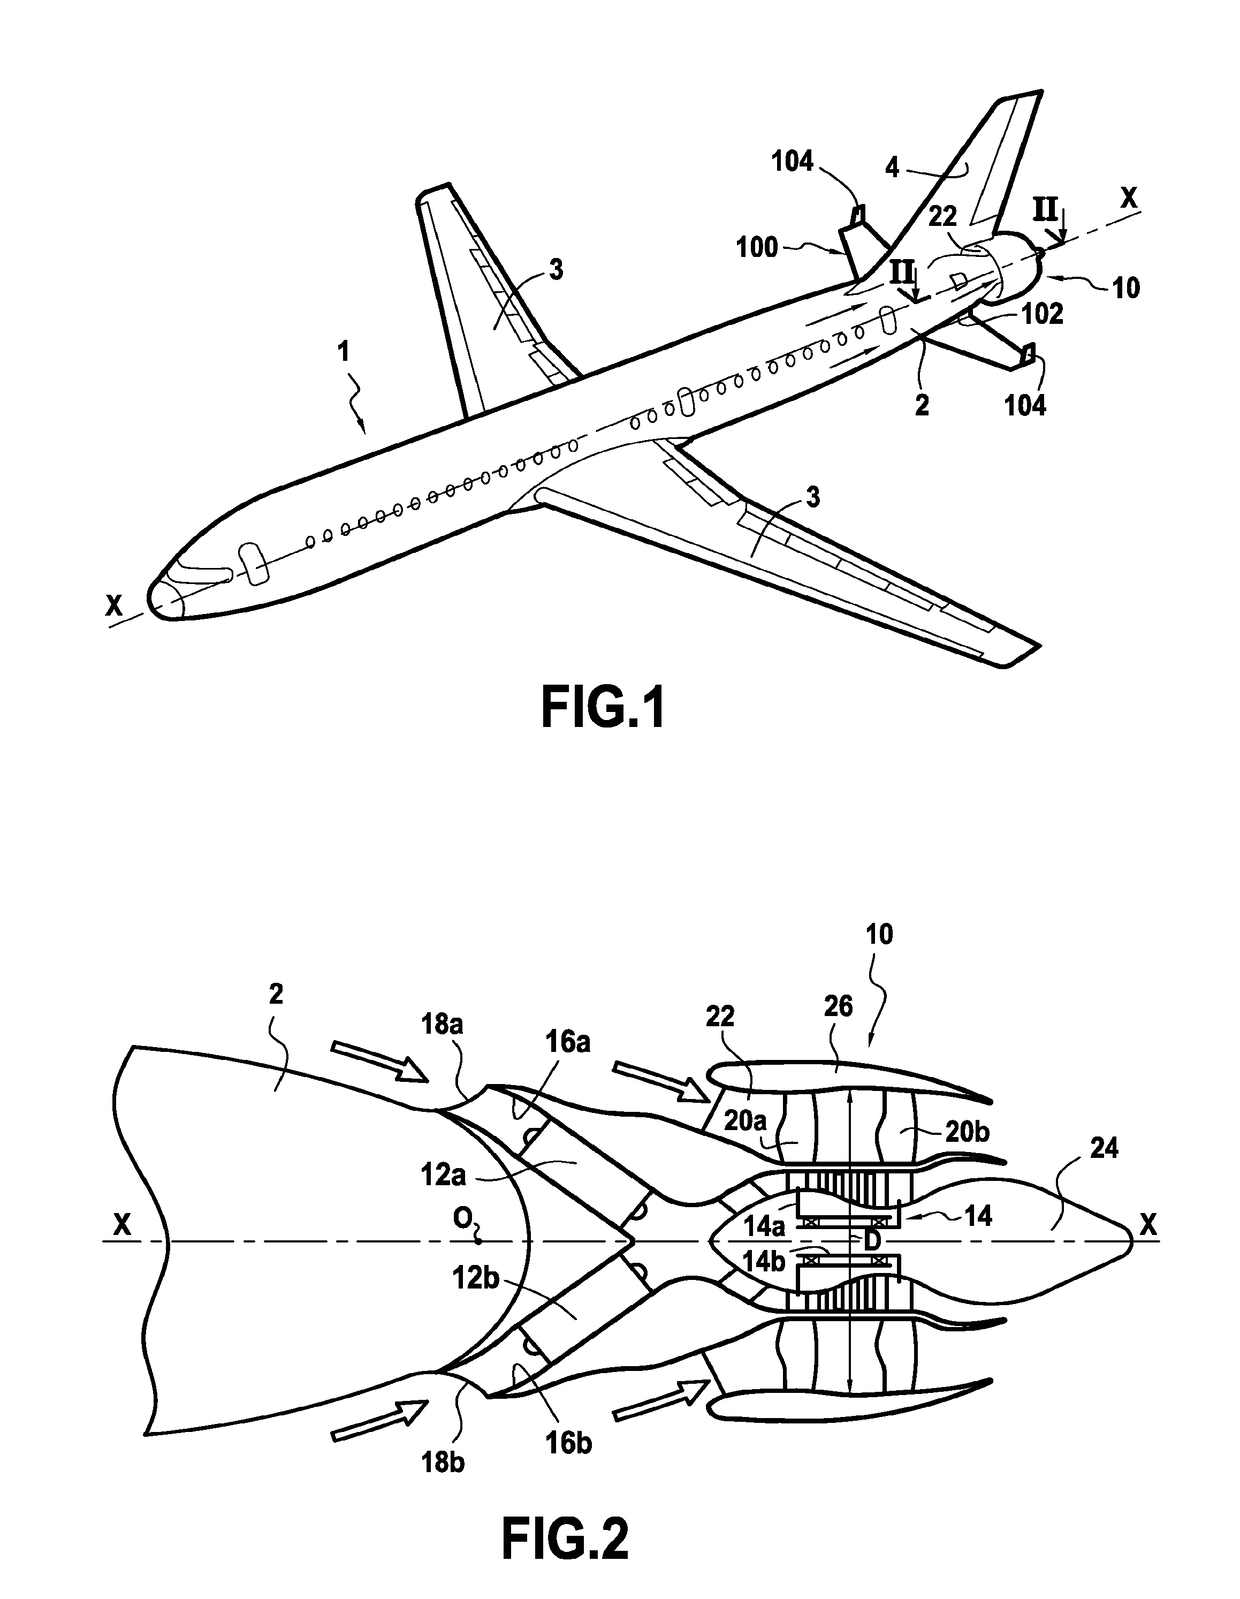 A turbine engine propelled airplane having an acoustic baffle